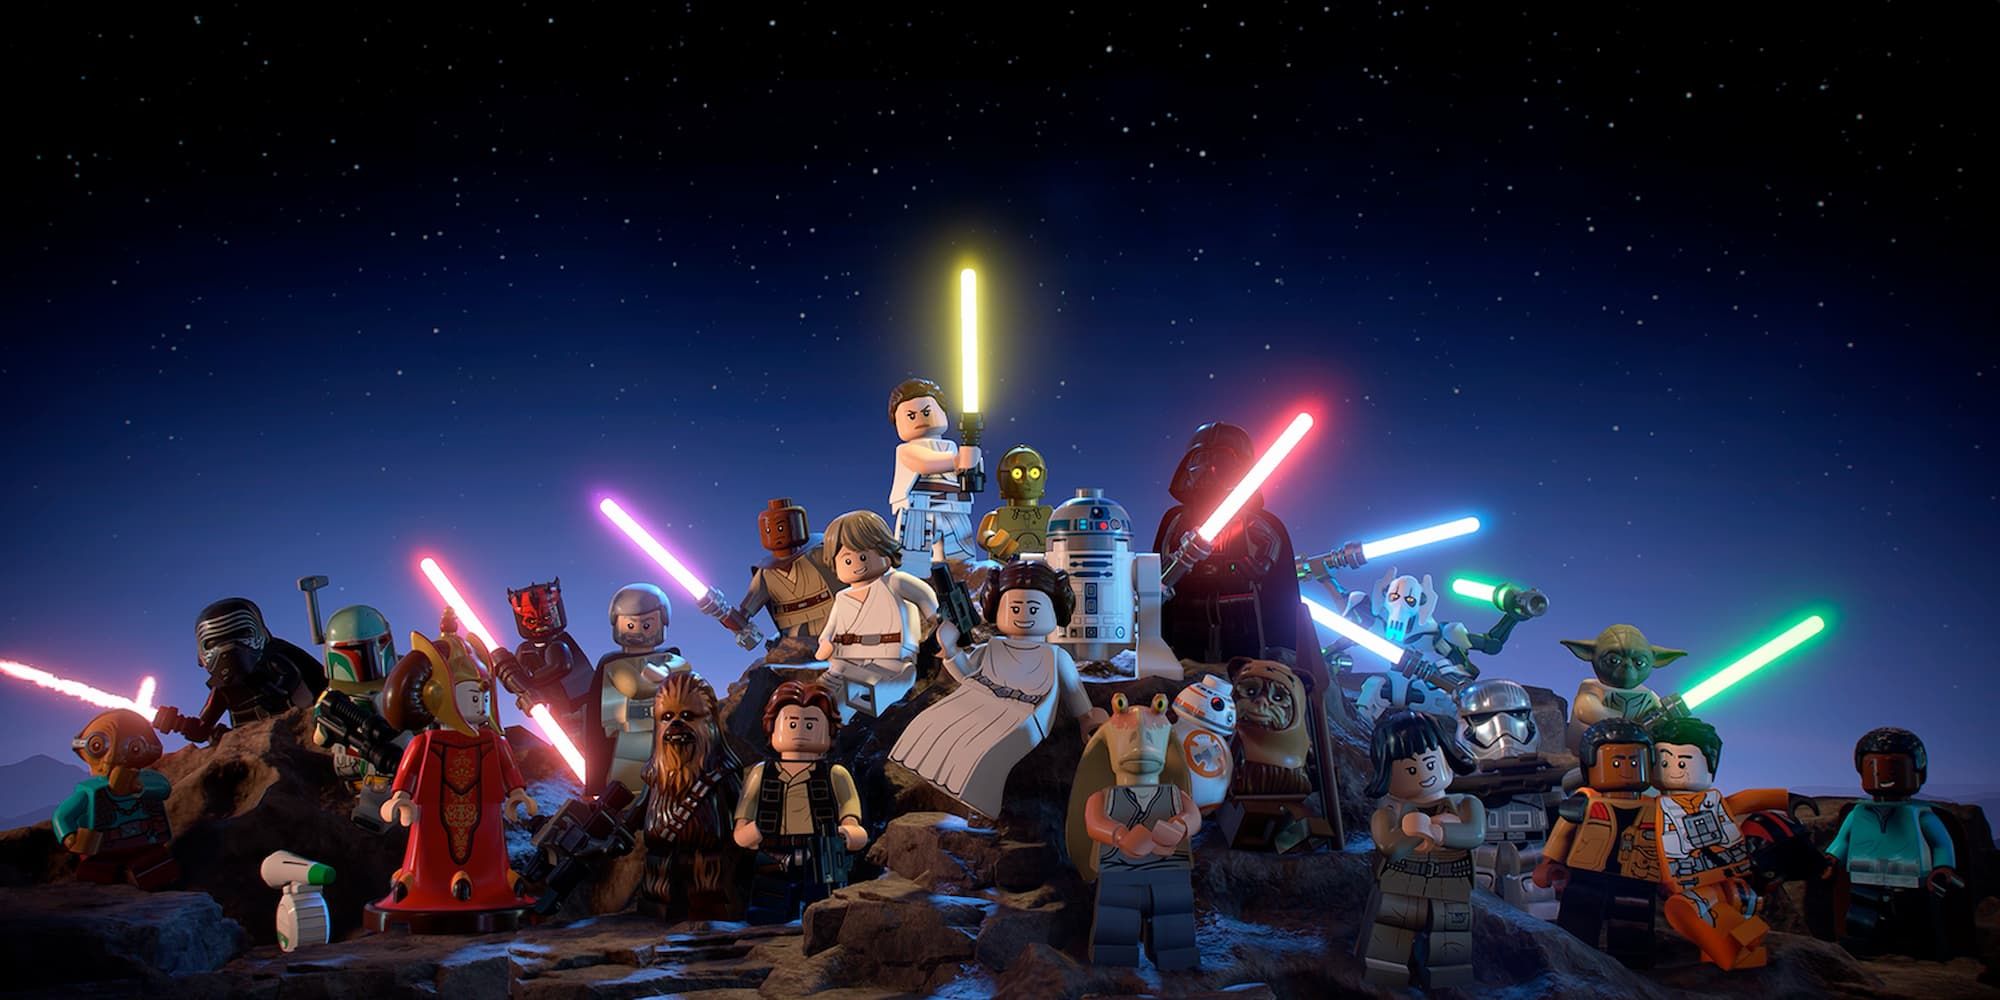 Several characters stand and pose, some with weapons such as lightsabers, in Lego Star Wars: The Skywalker Saga.